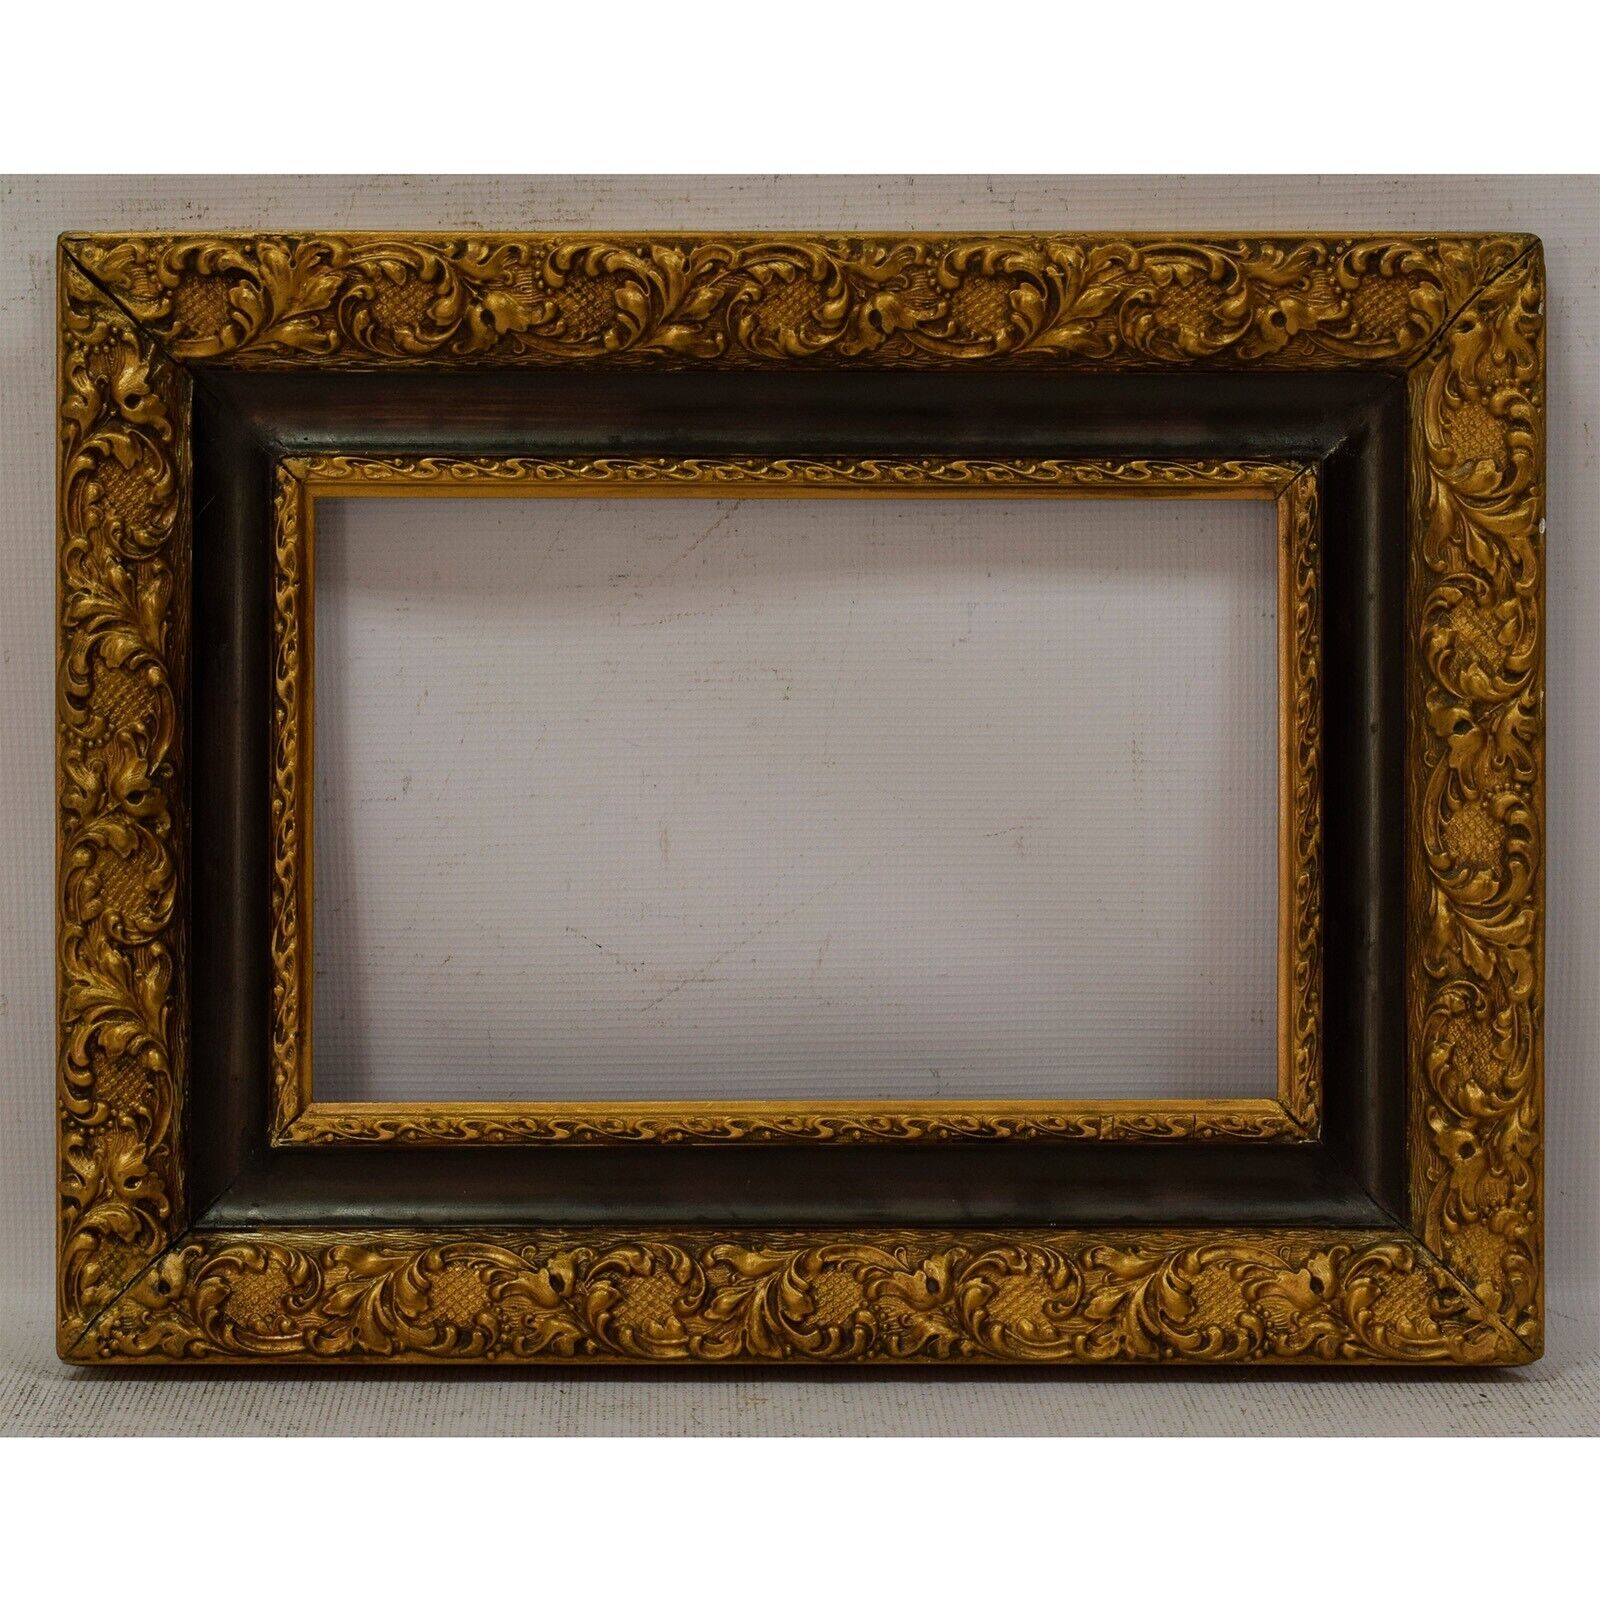 Ca 1870-1900  Old frame original condition with gold paint Internal: 13 x 8.3 in